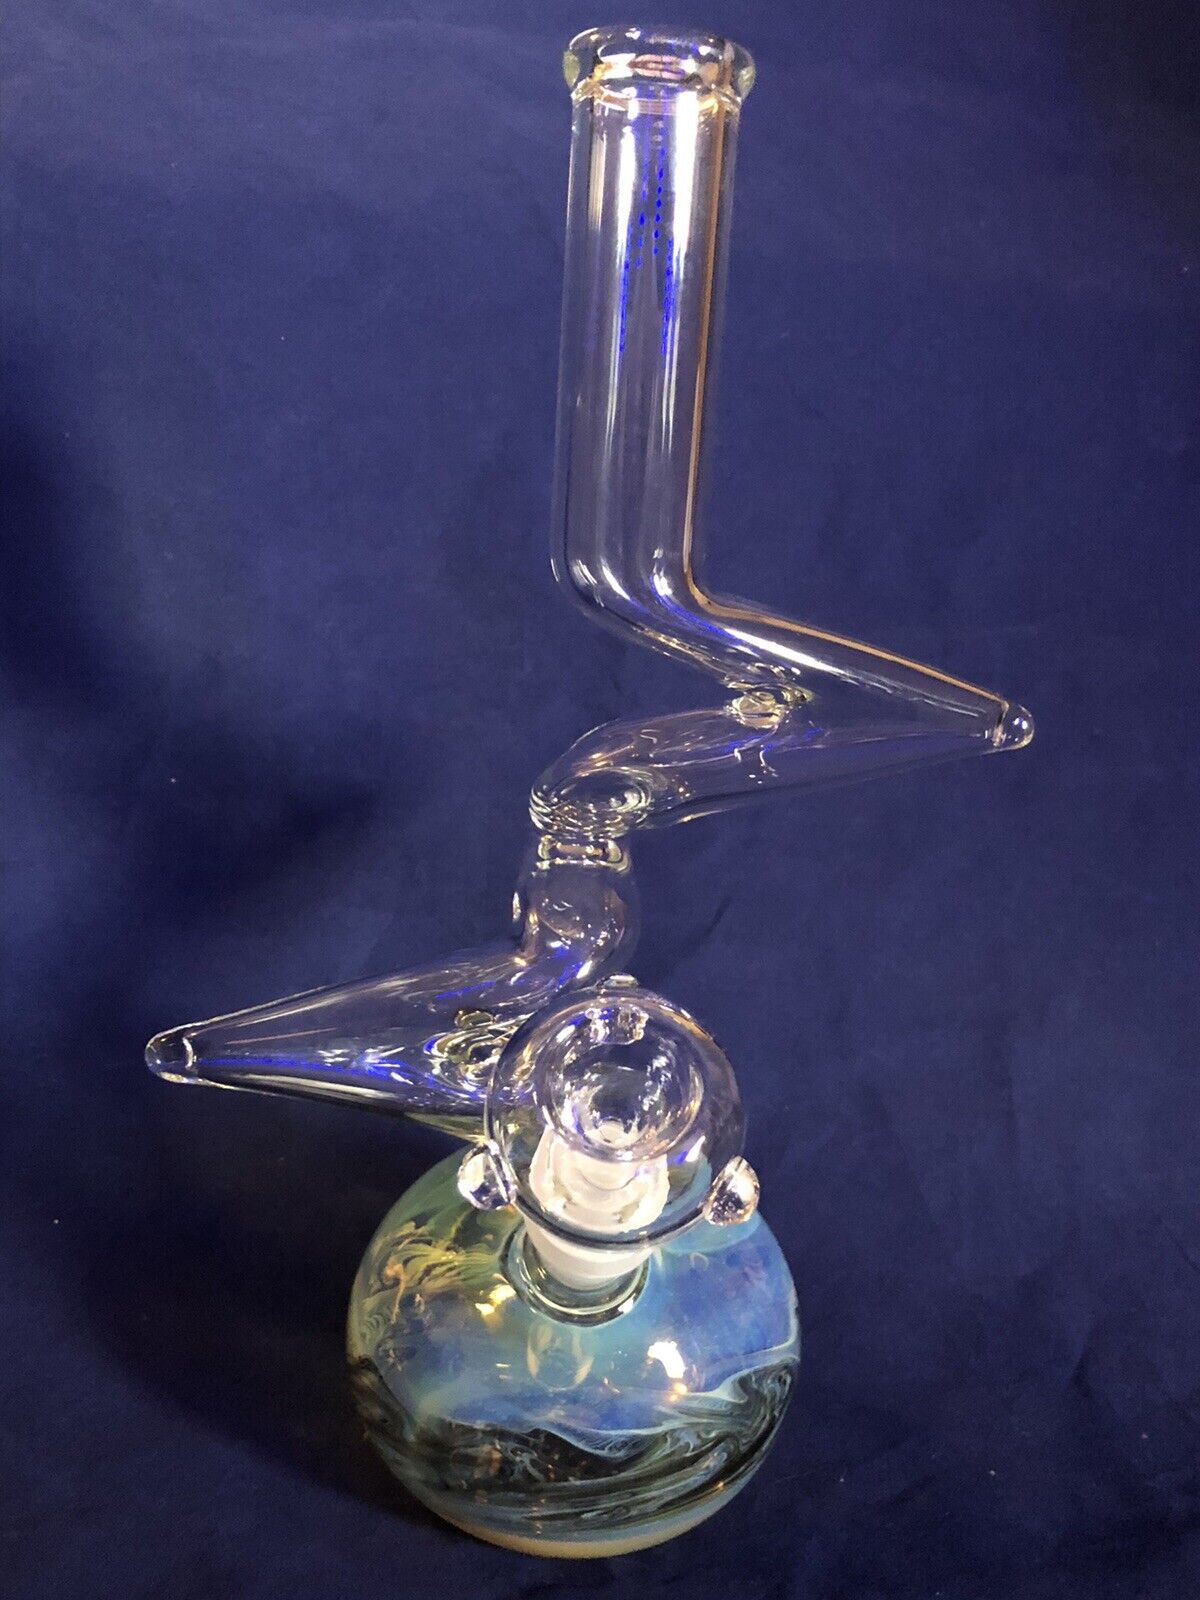 12''inch Three Zong Glass Water Bong Pipe,Silver And Black Color. Available Now for 45.00